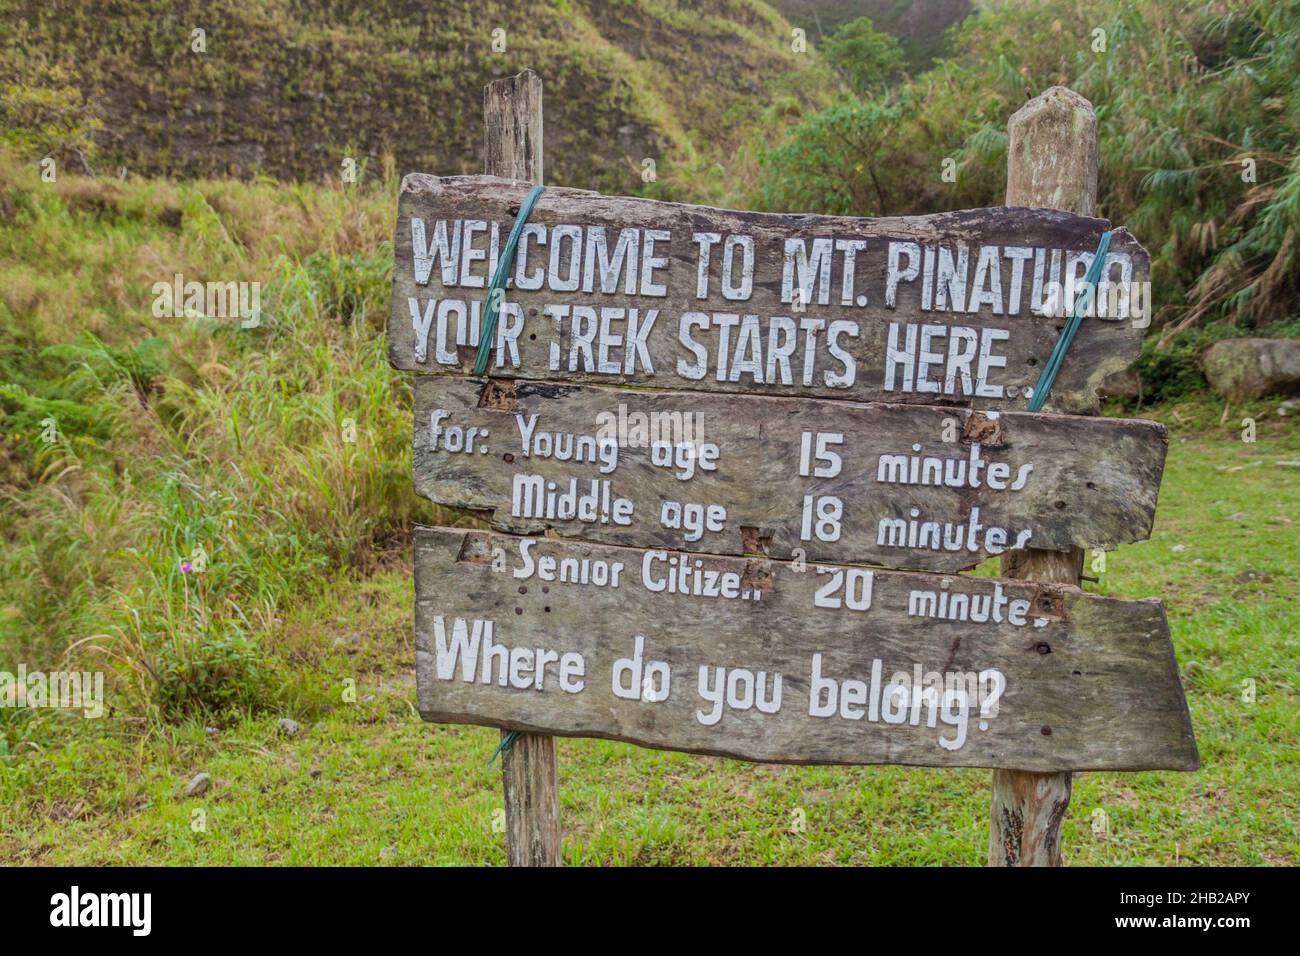 Wooden tourist information sign at Pinatubo volcano. Stock Photo